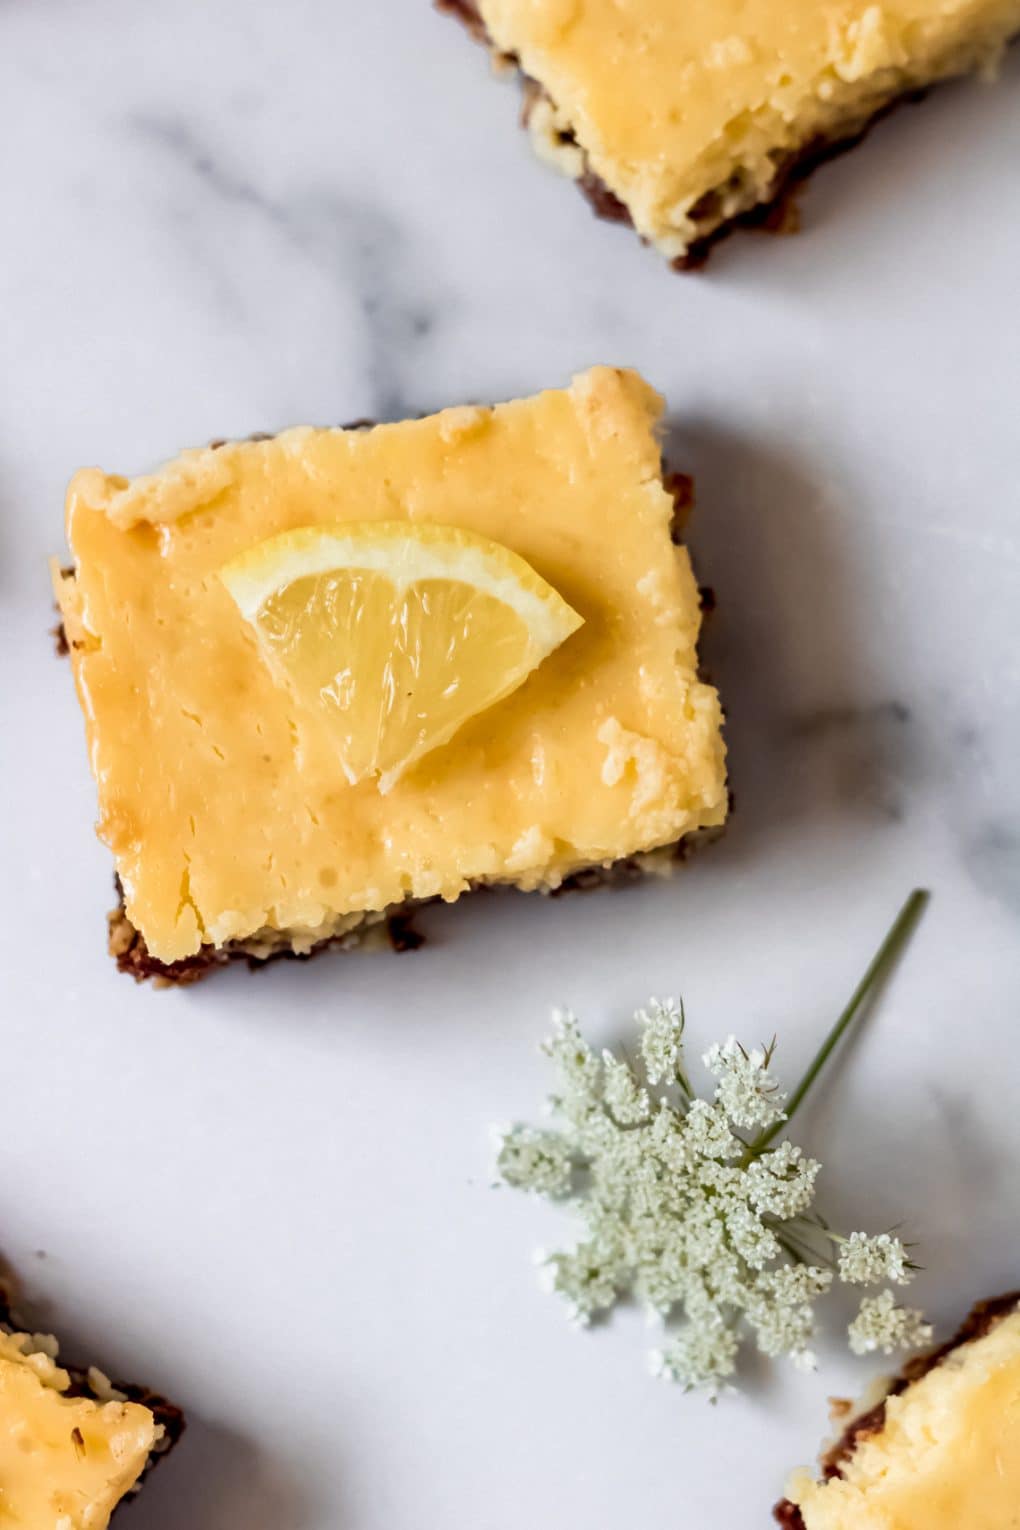 gluten-free lemon bars cut into squares on a table with a white flower nearby